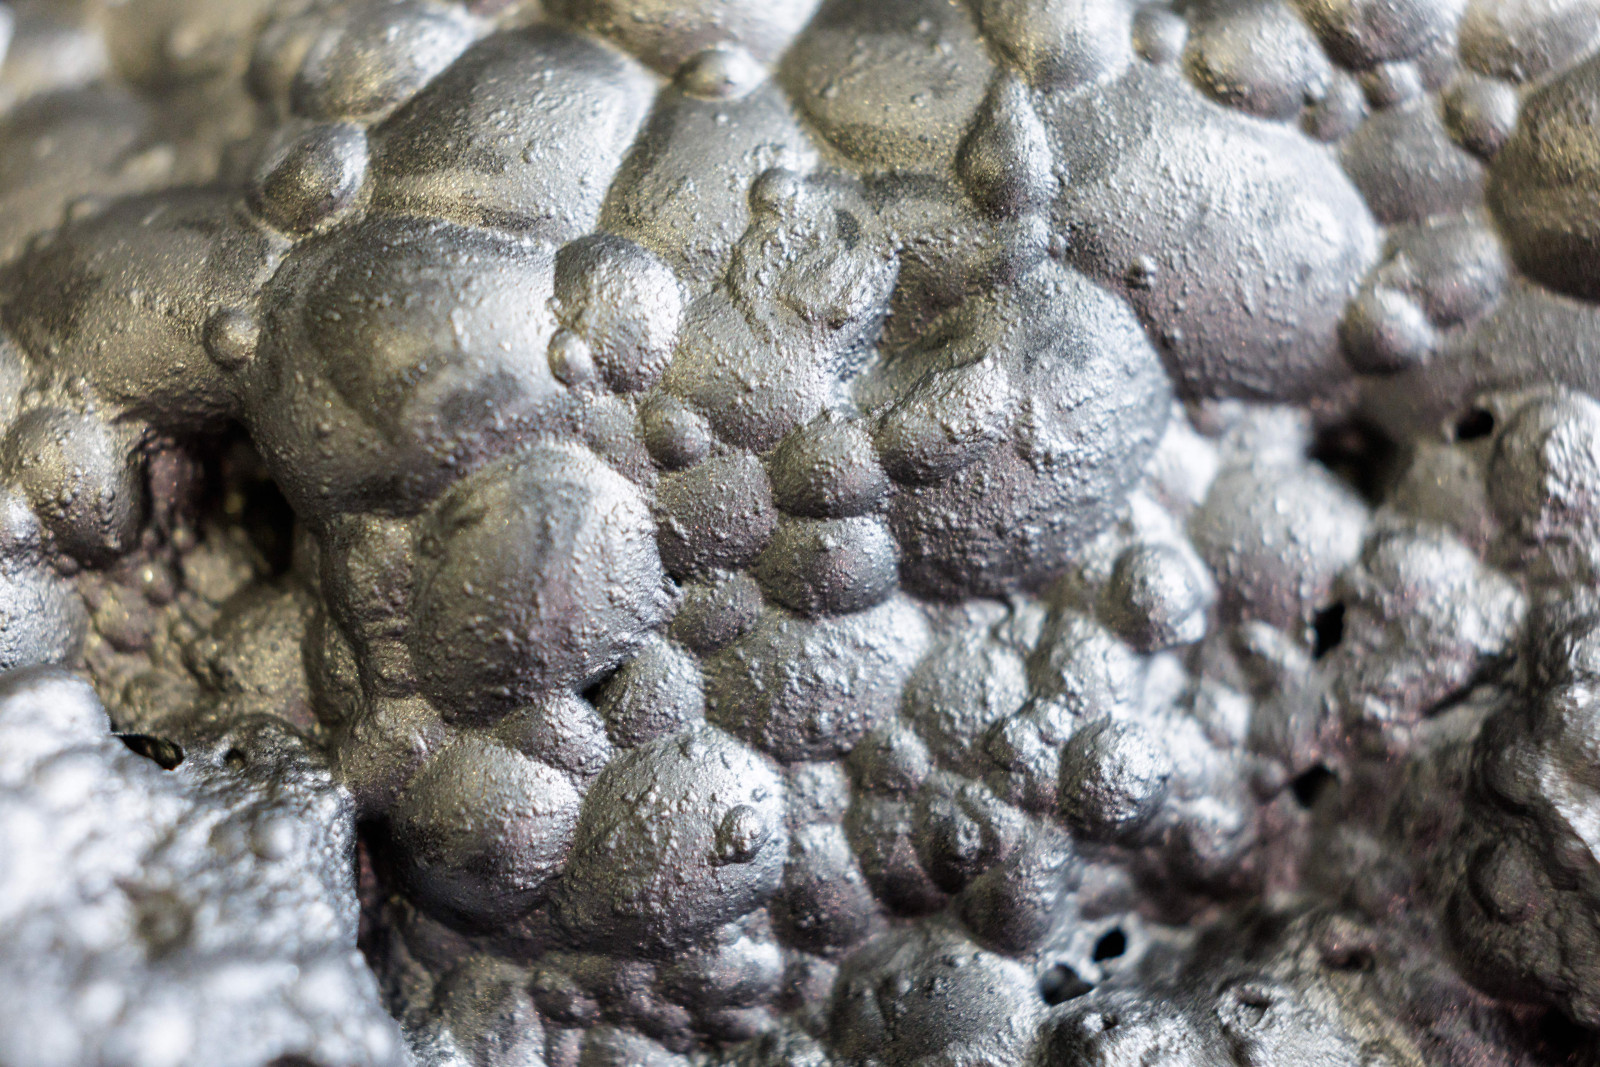 A very close-up image of air bubbles in a silvery metallic substance